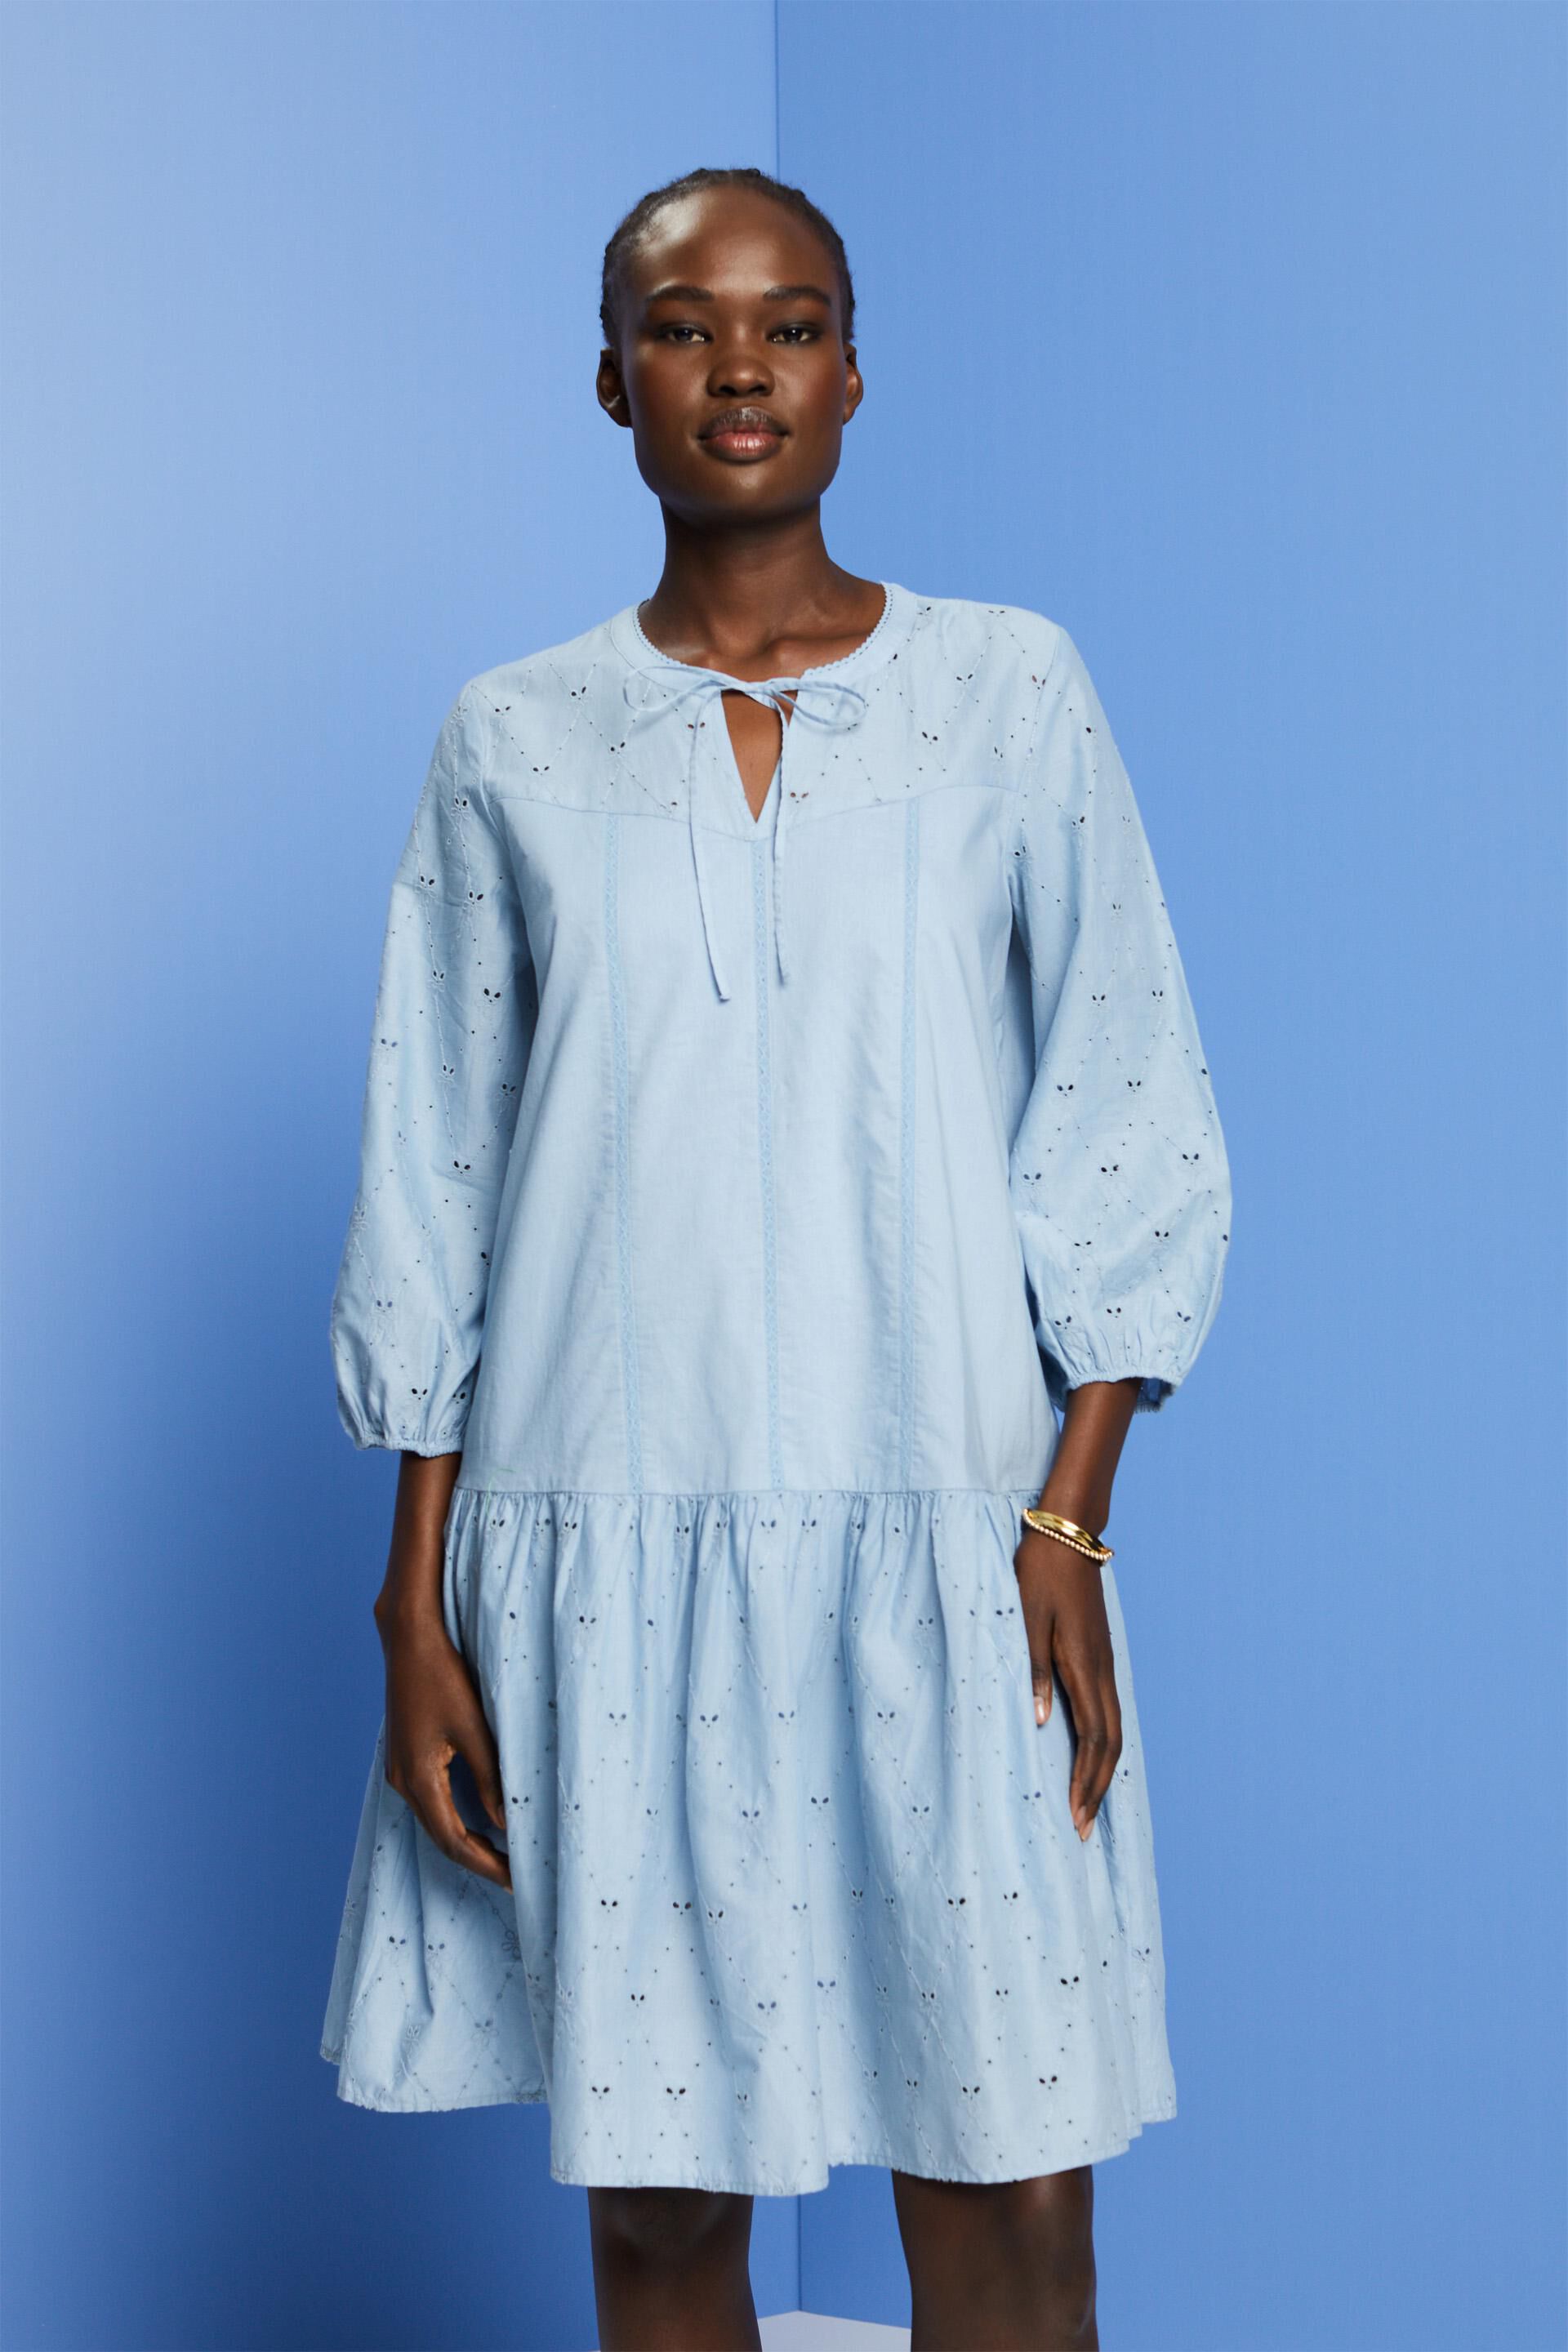 ESPRIT - Embroidered dress, 100% cotton at our online shop